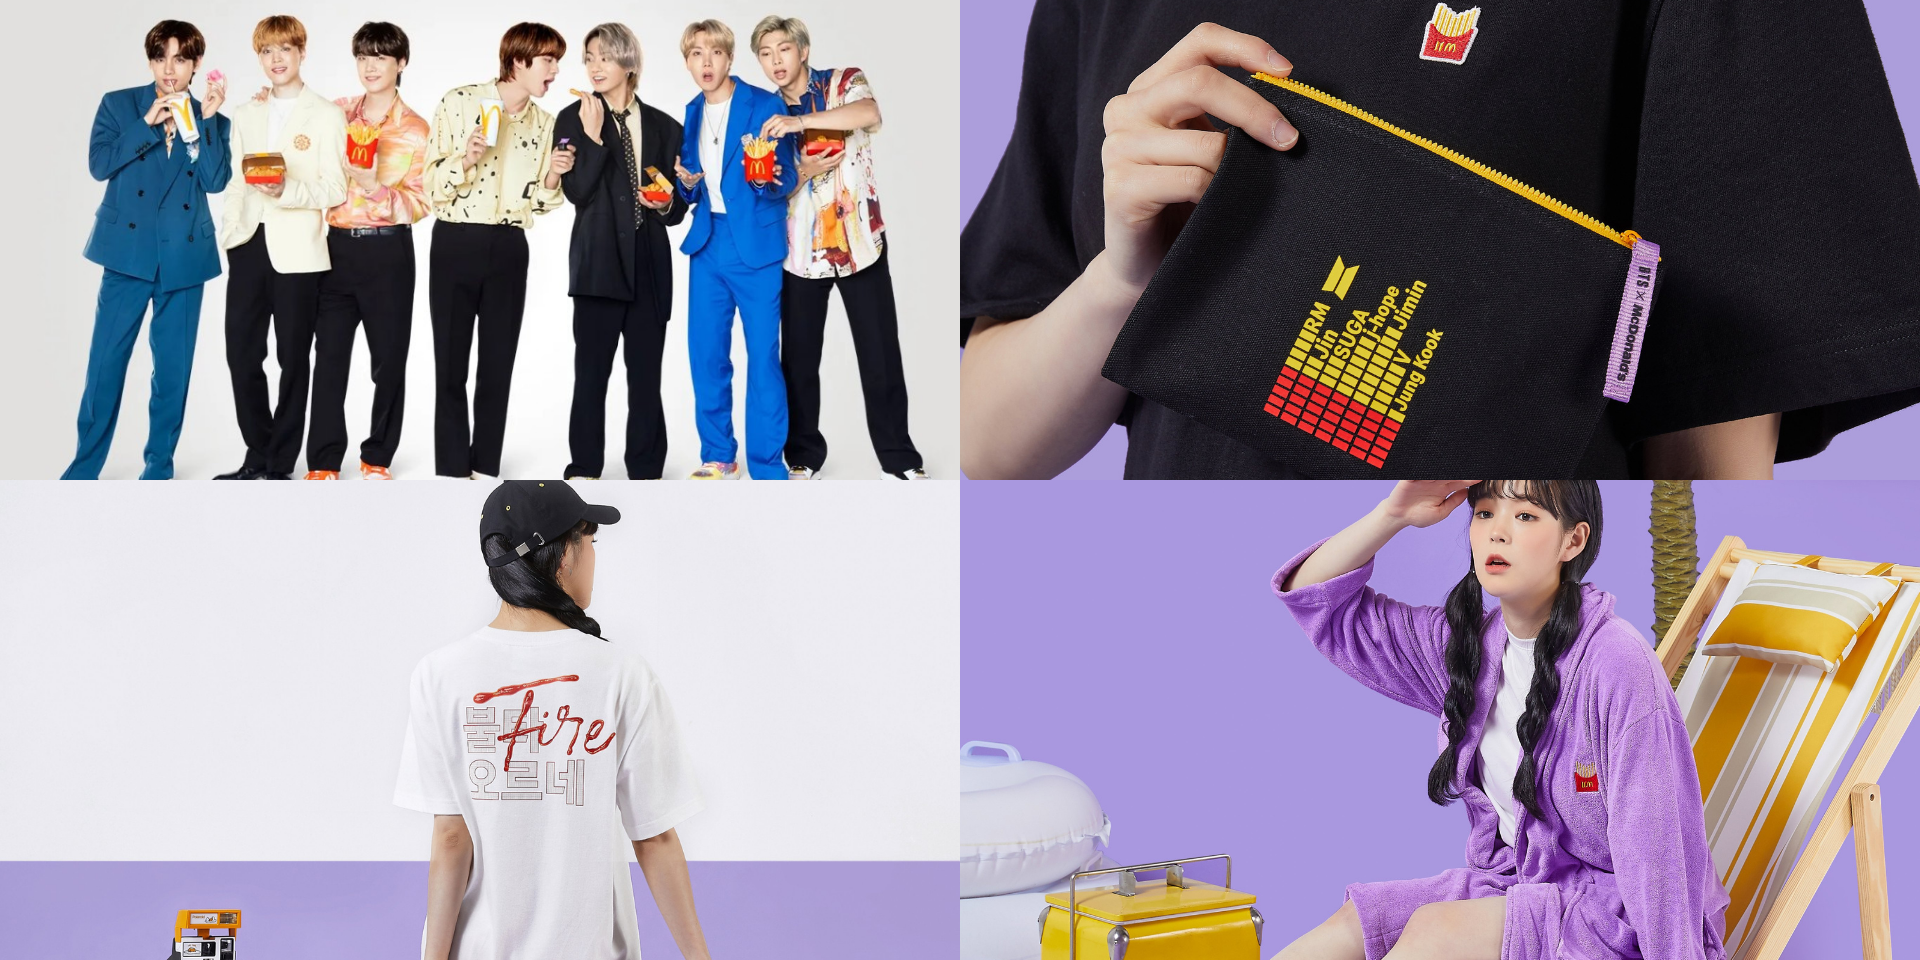 The BTS x McDonald's collaboration merch (photocards included) is out now, here's how to order